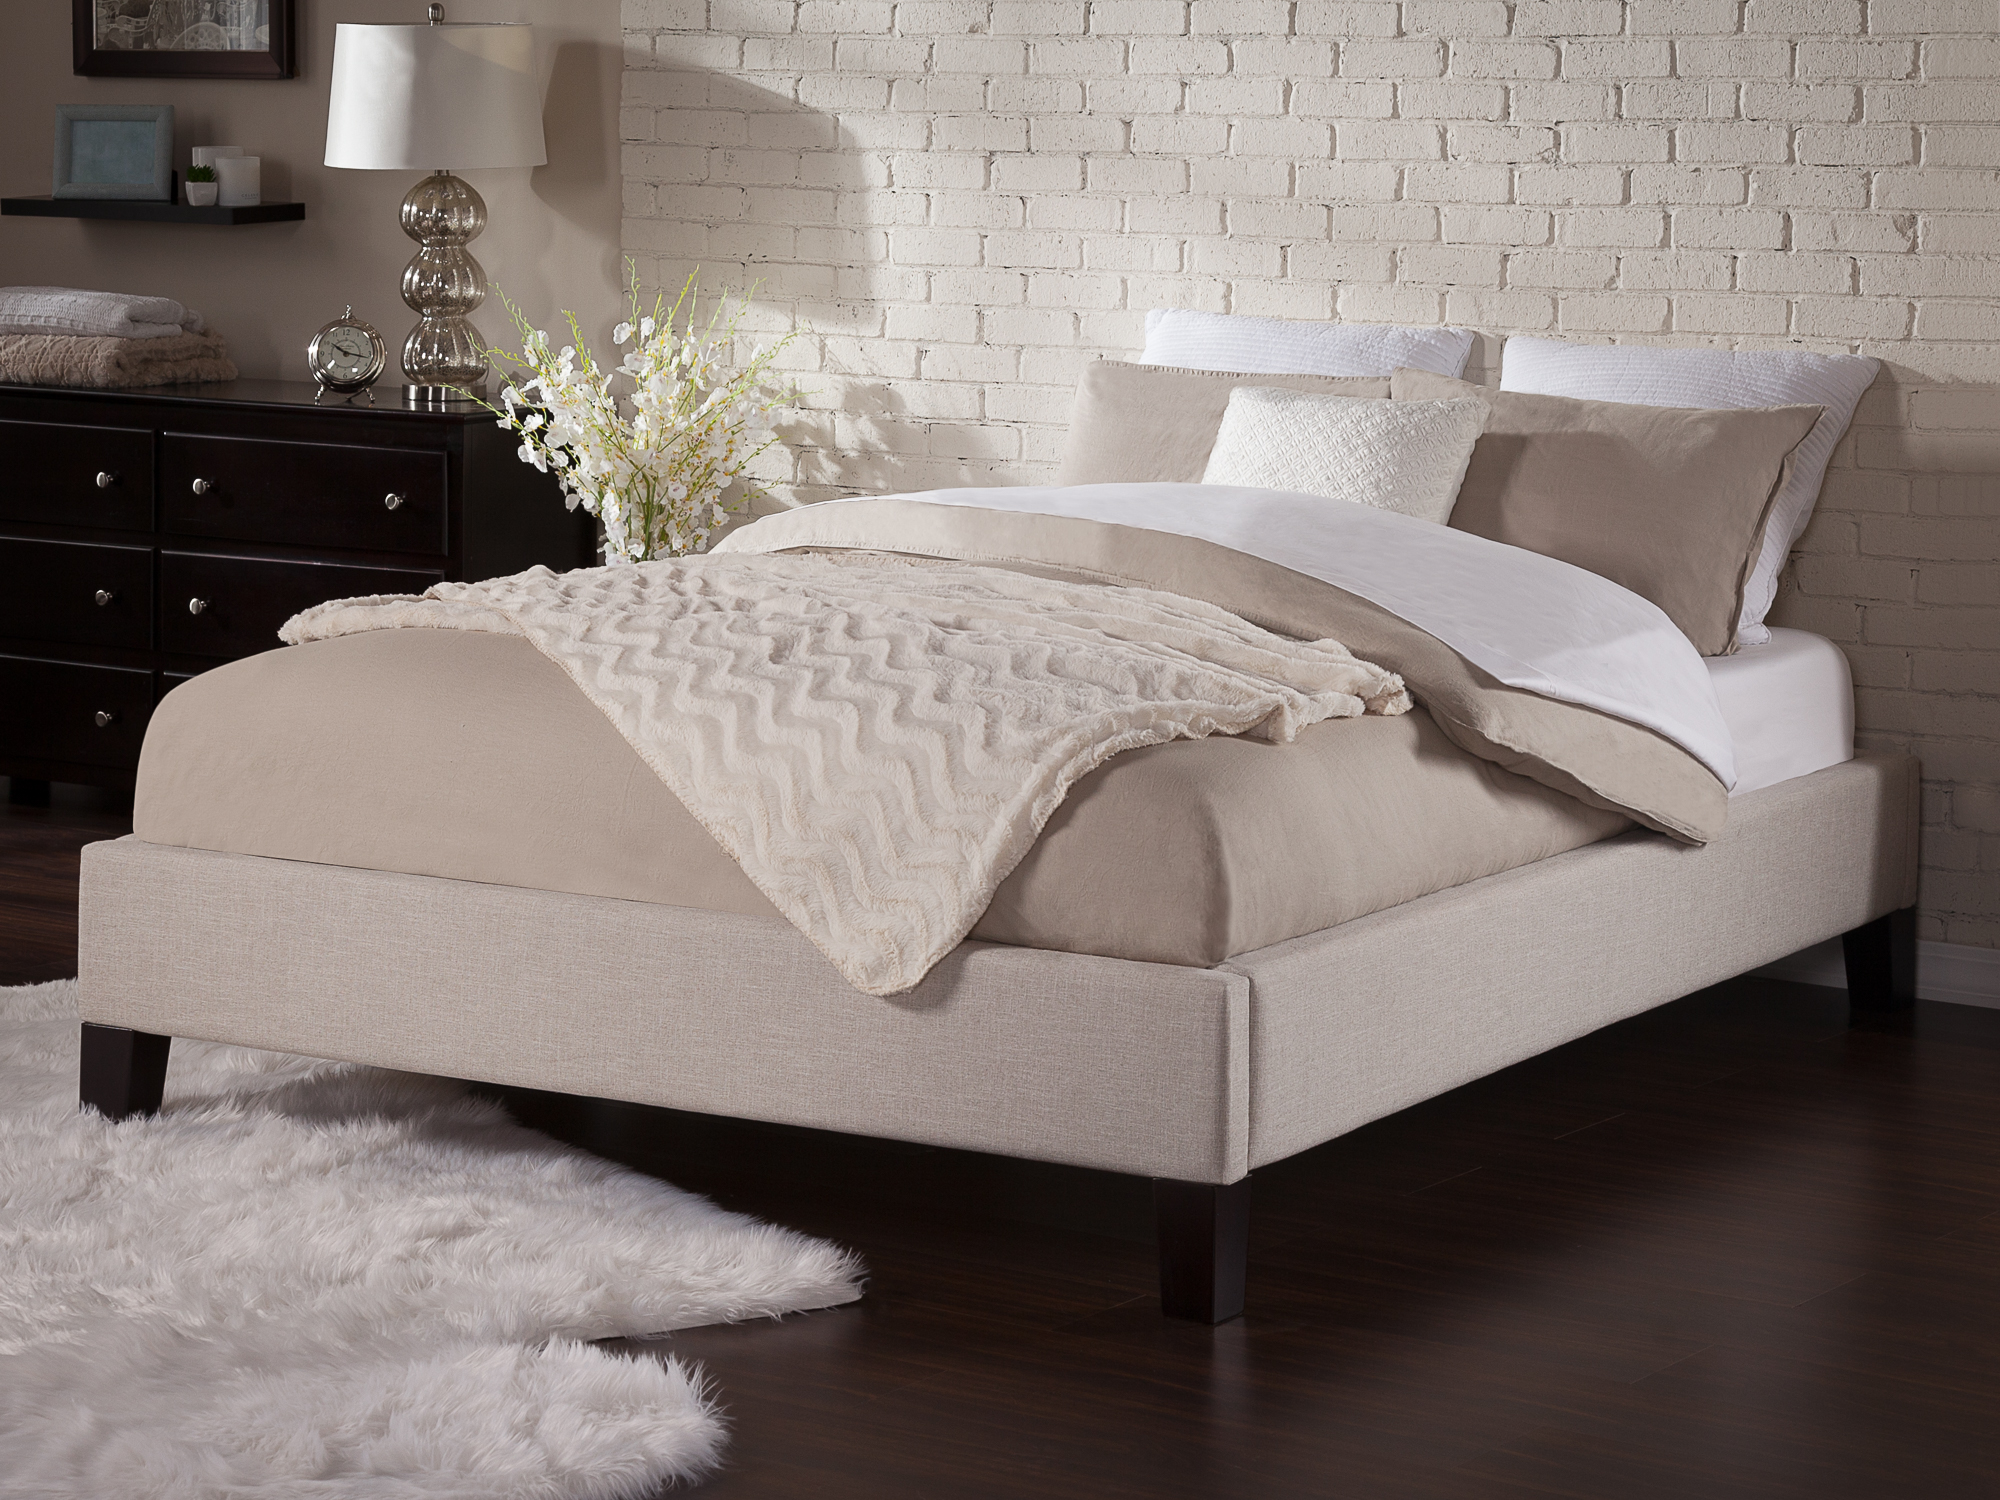 Cozy modern bed with pillows and a beige comforter in a stylish bedroom setup, ideal for HD desktop wallpaper and background.